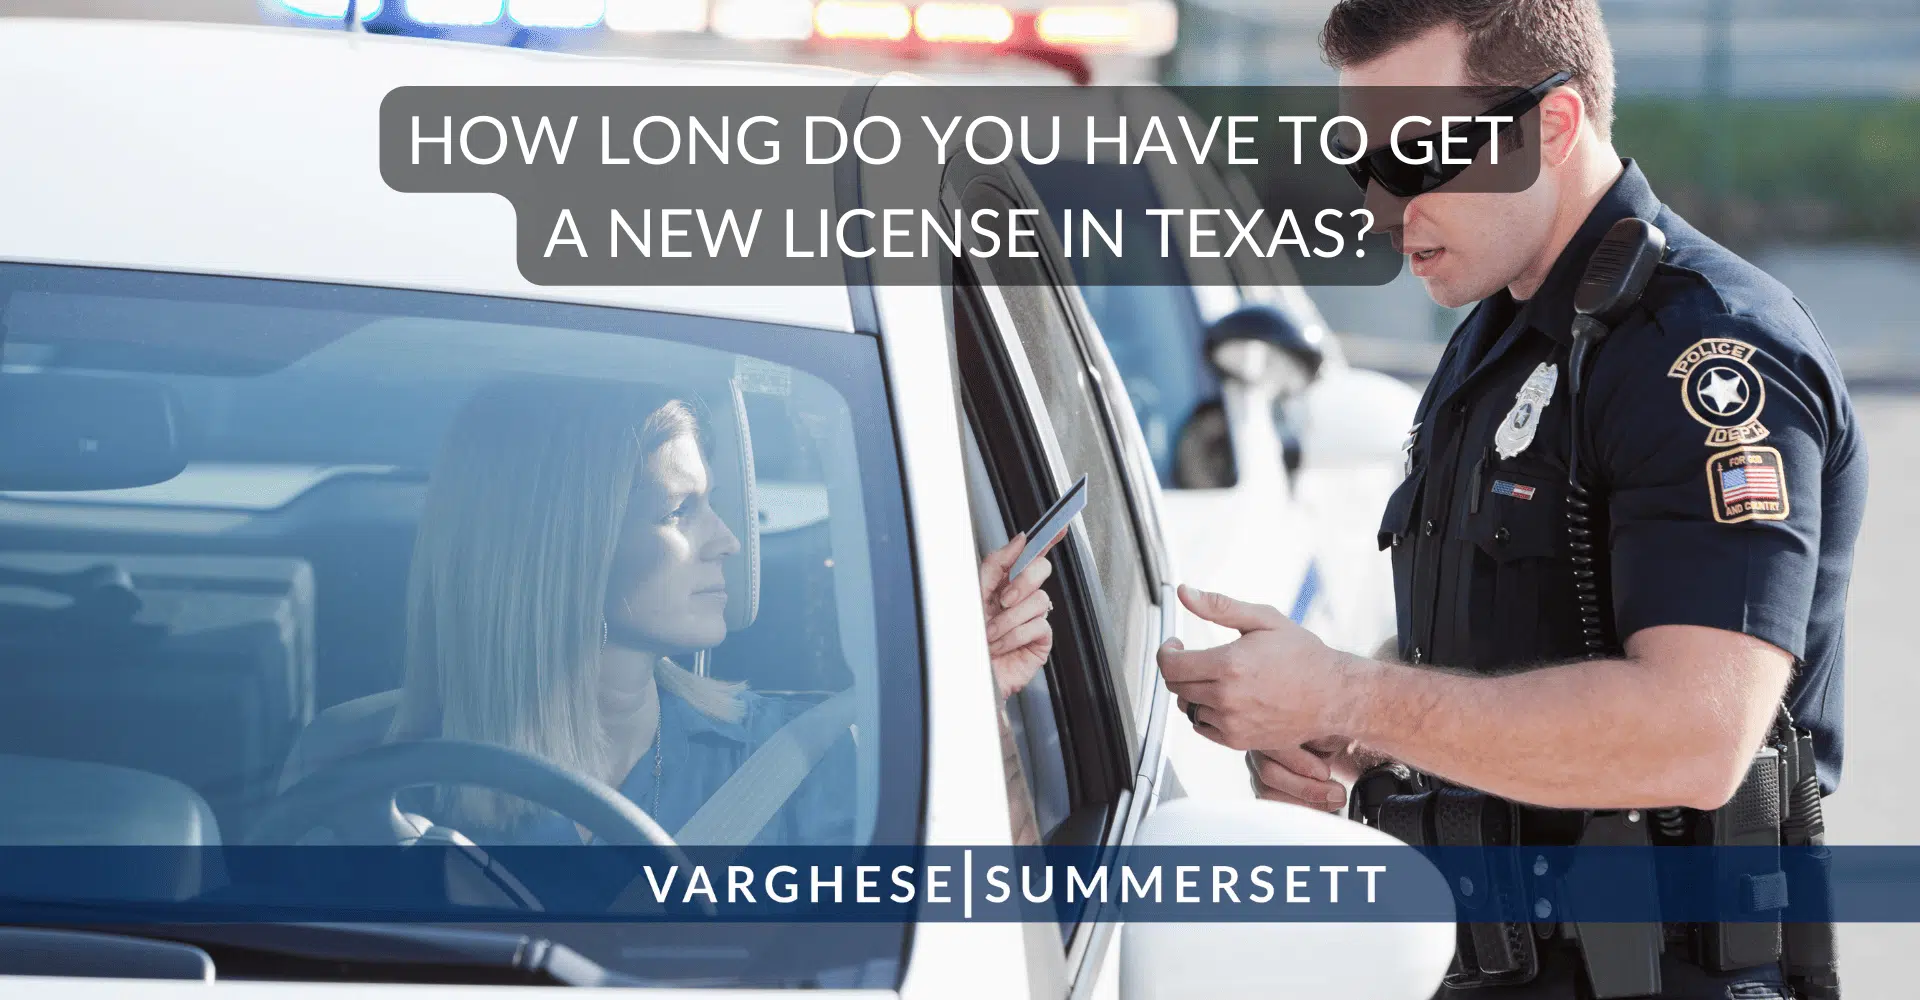 How long do you have to get a new license in texas?